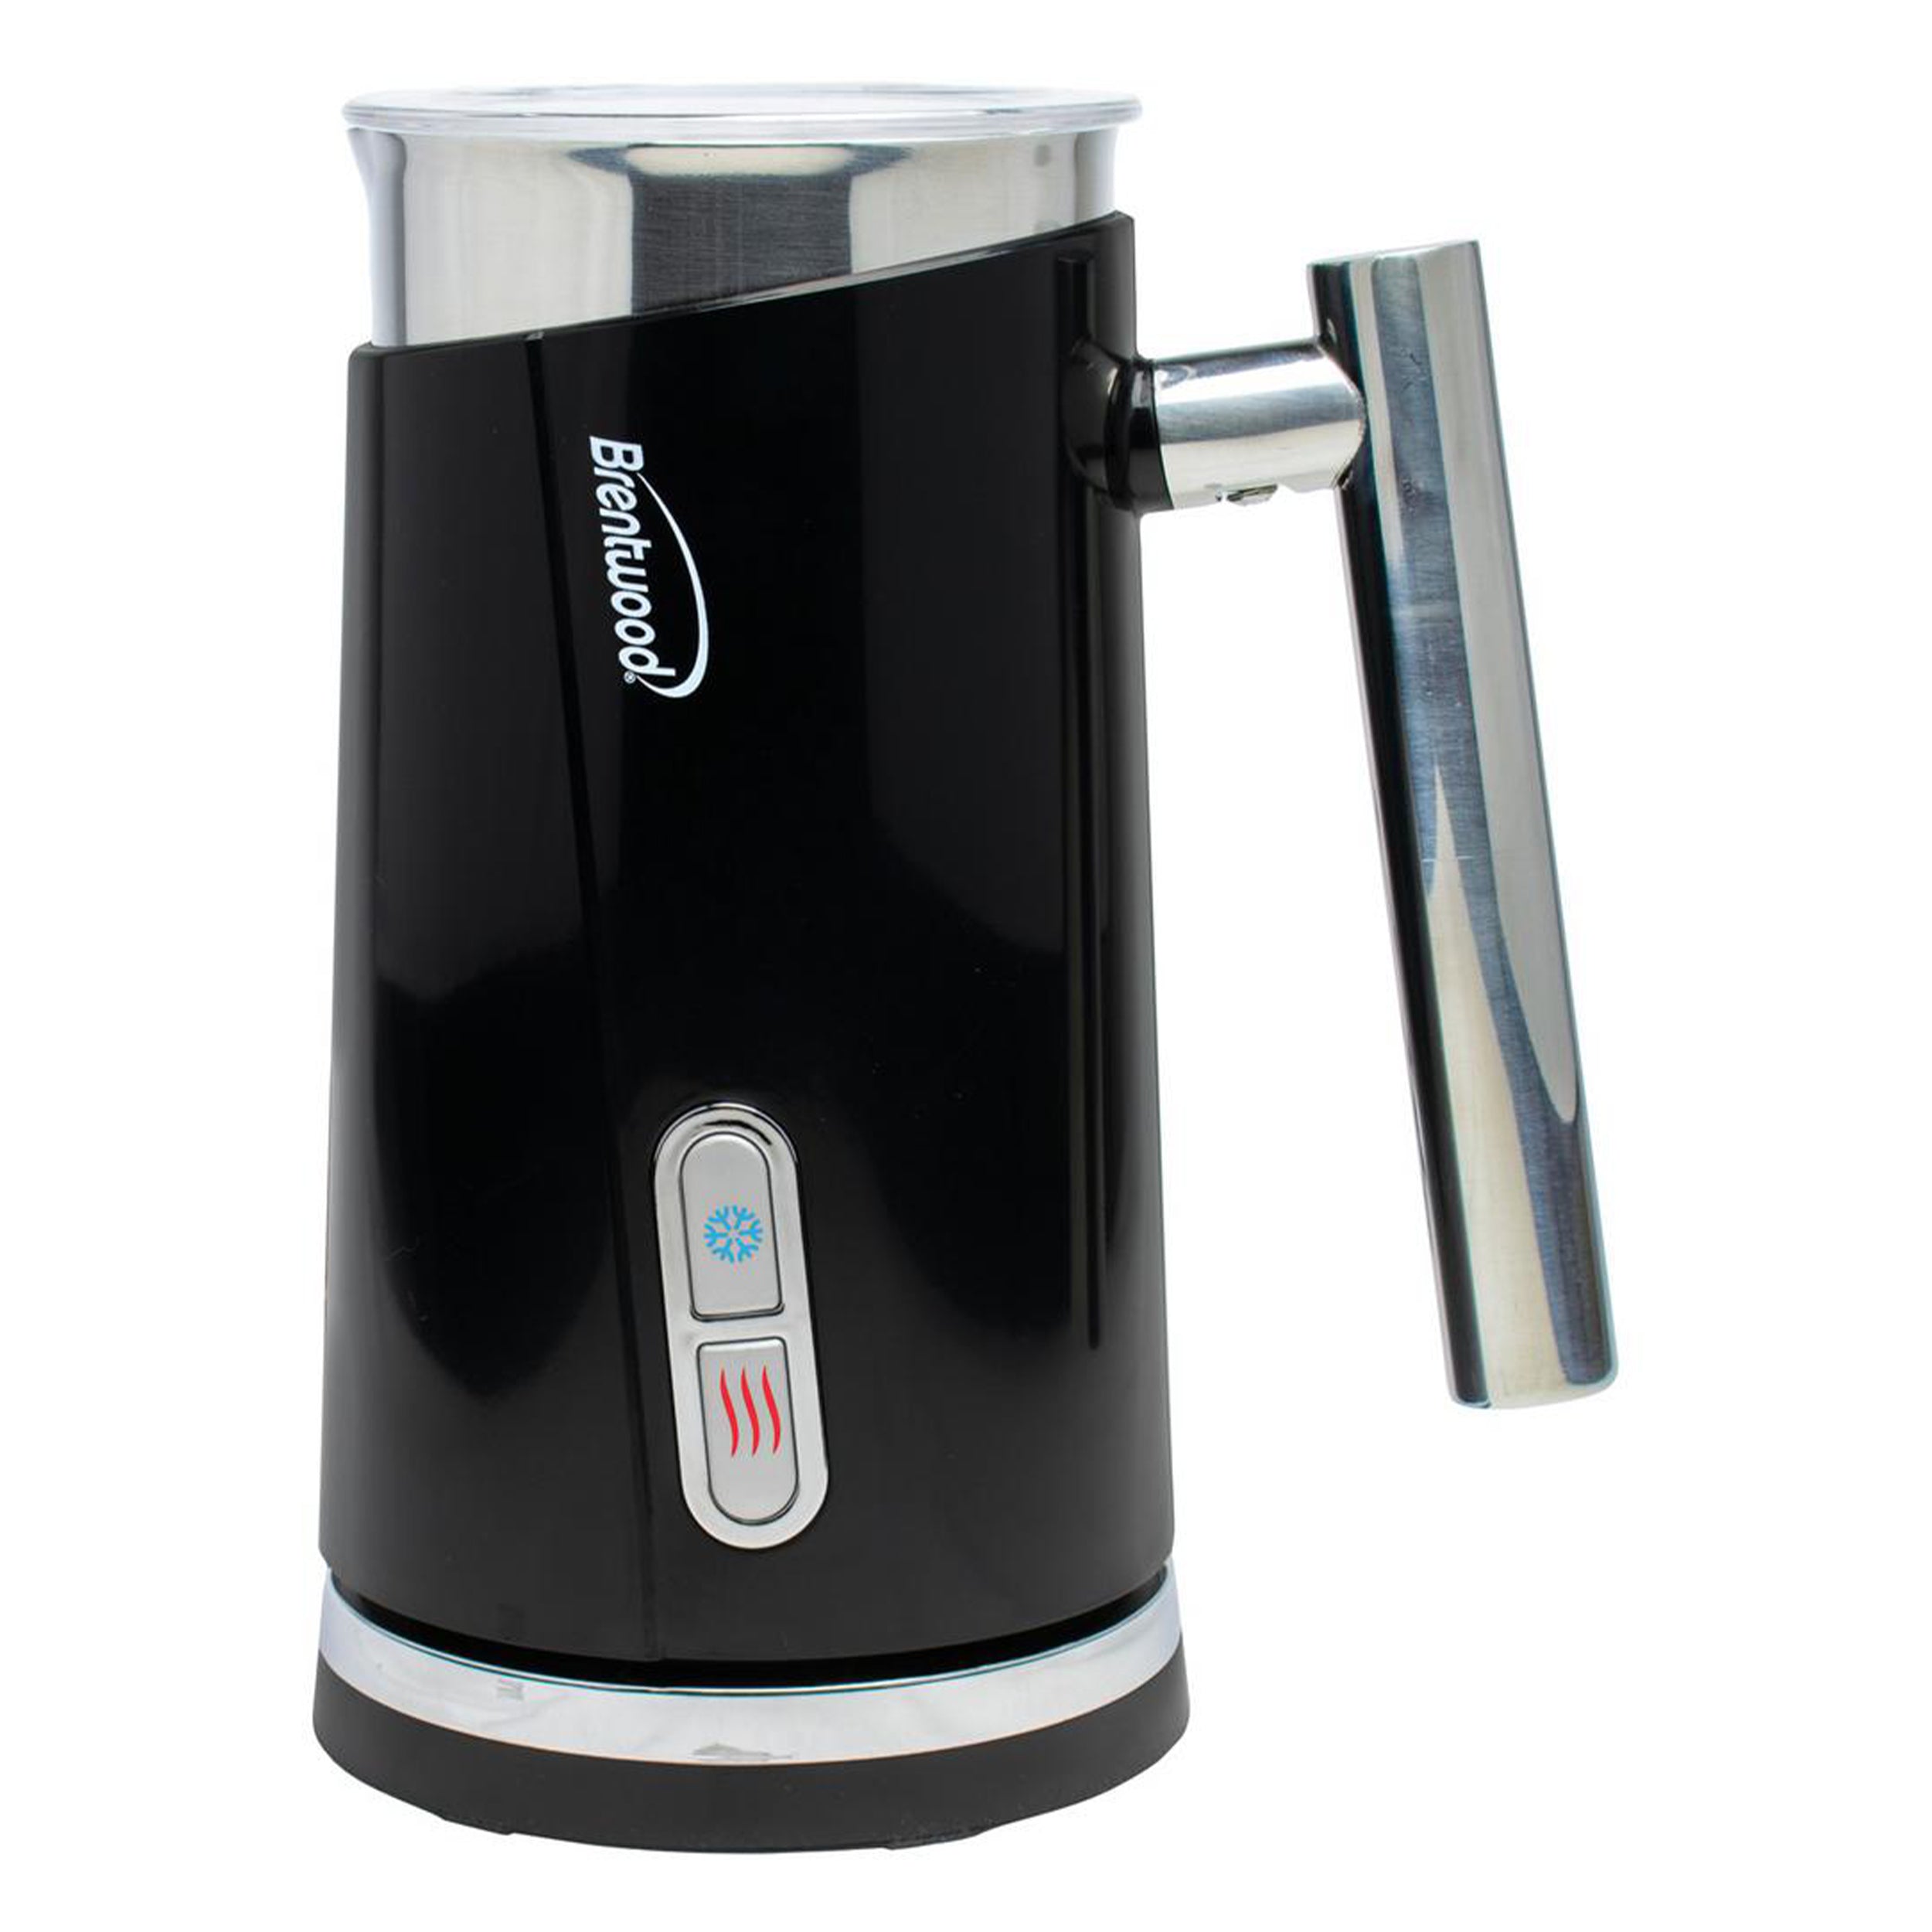 Brentwood Brentwood 10 Ounce Cordless Electric Milk Frother and Warmer in Black